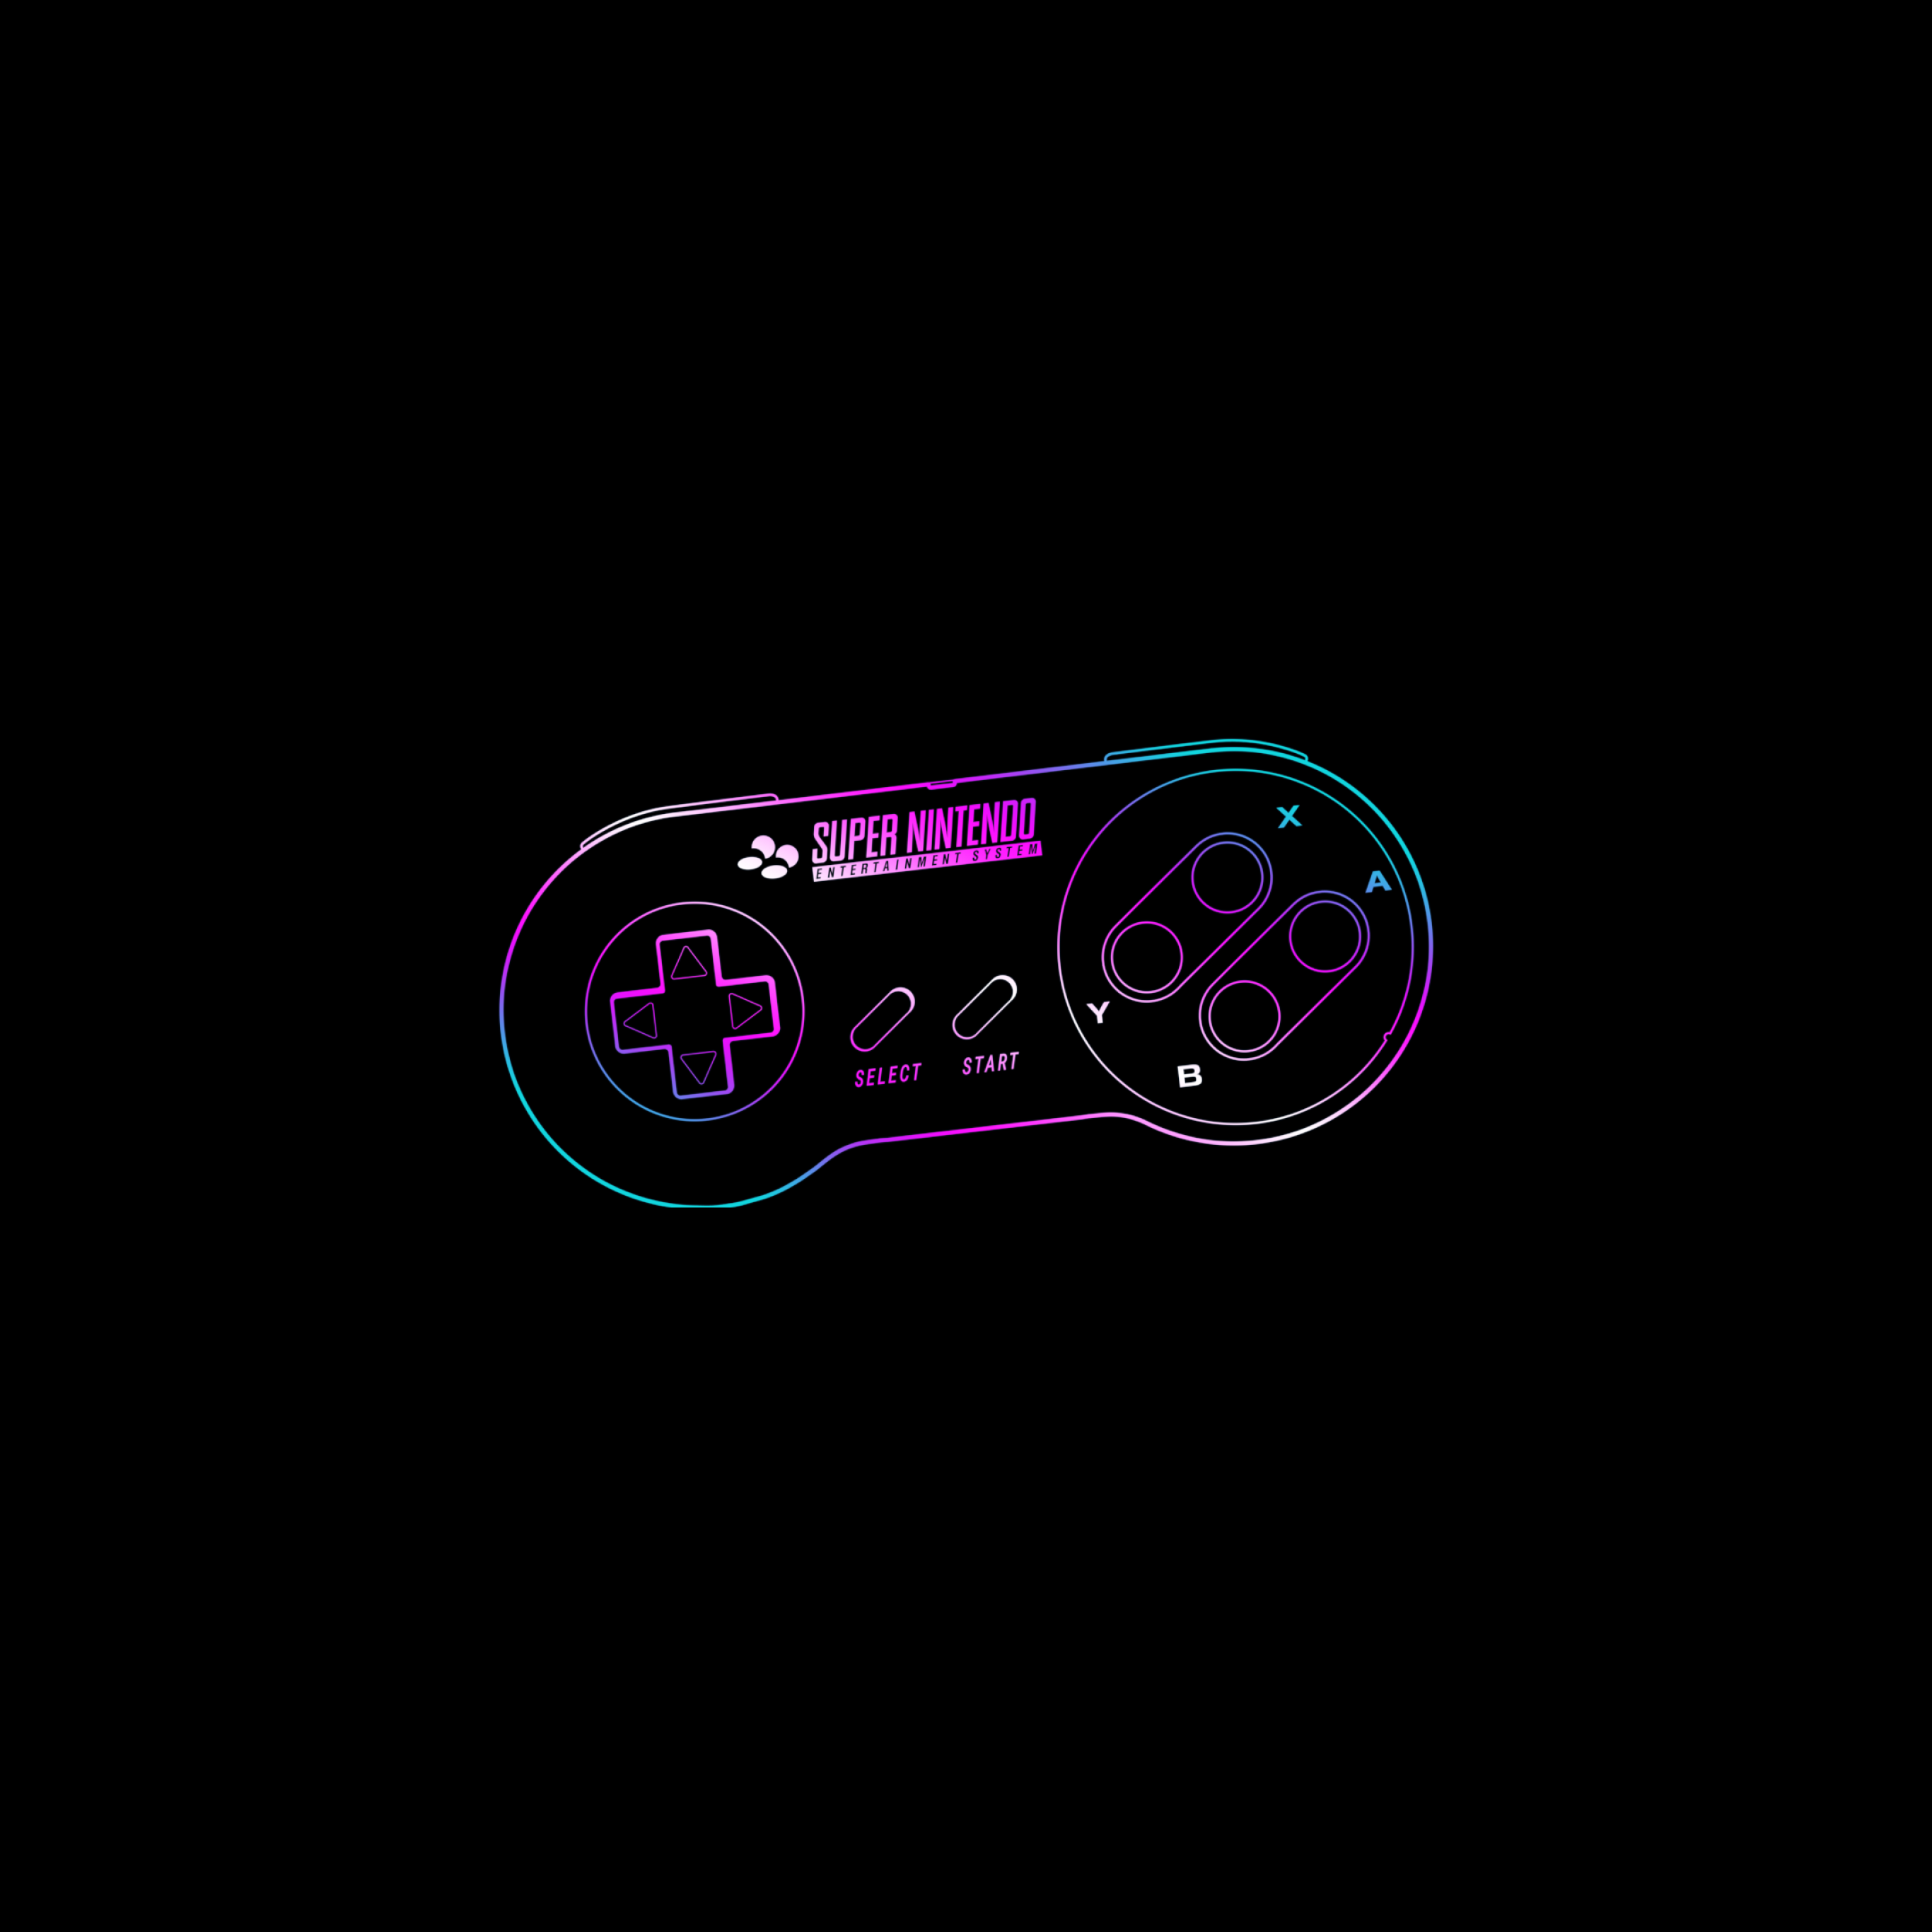 Neon game controllers or joysticks for game console  stock vector 3193939   Crushpixel